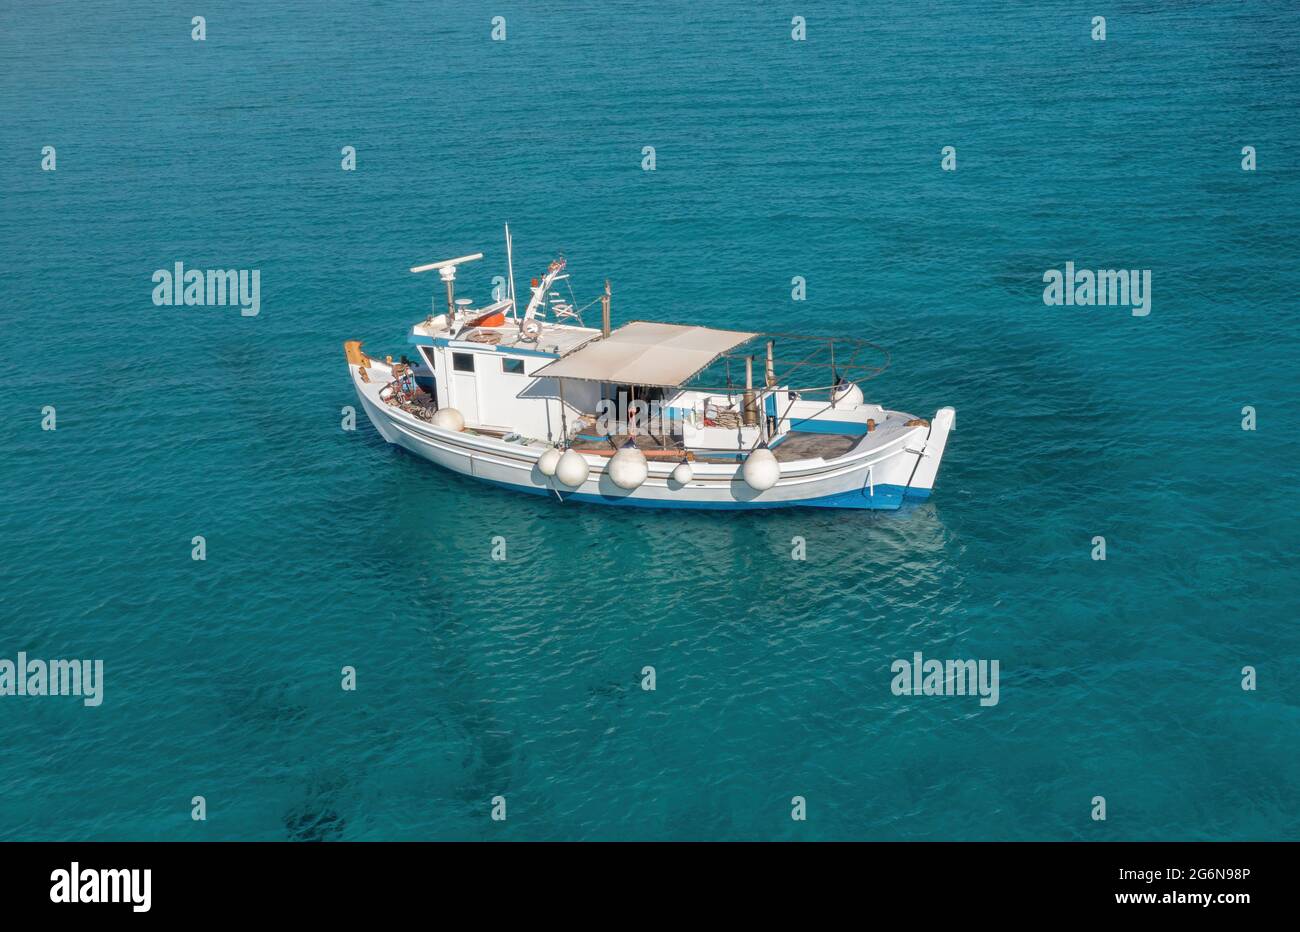 Fishing boat on turquoise blue color sea background. Aerial drone view. Blue and white traditional trawler moored in Aegean rippled water, sunny day. Stock Photo